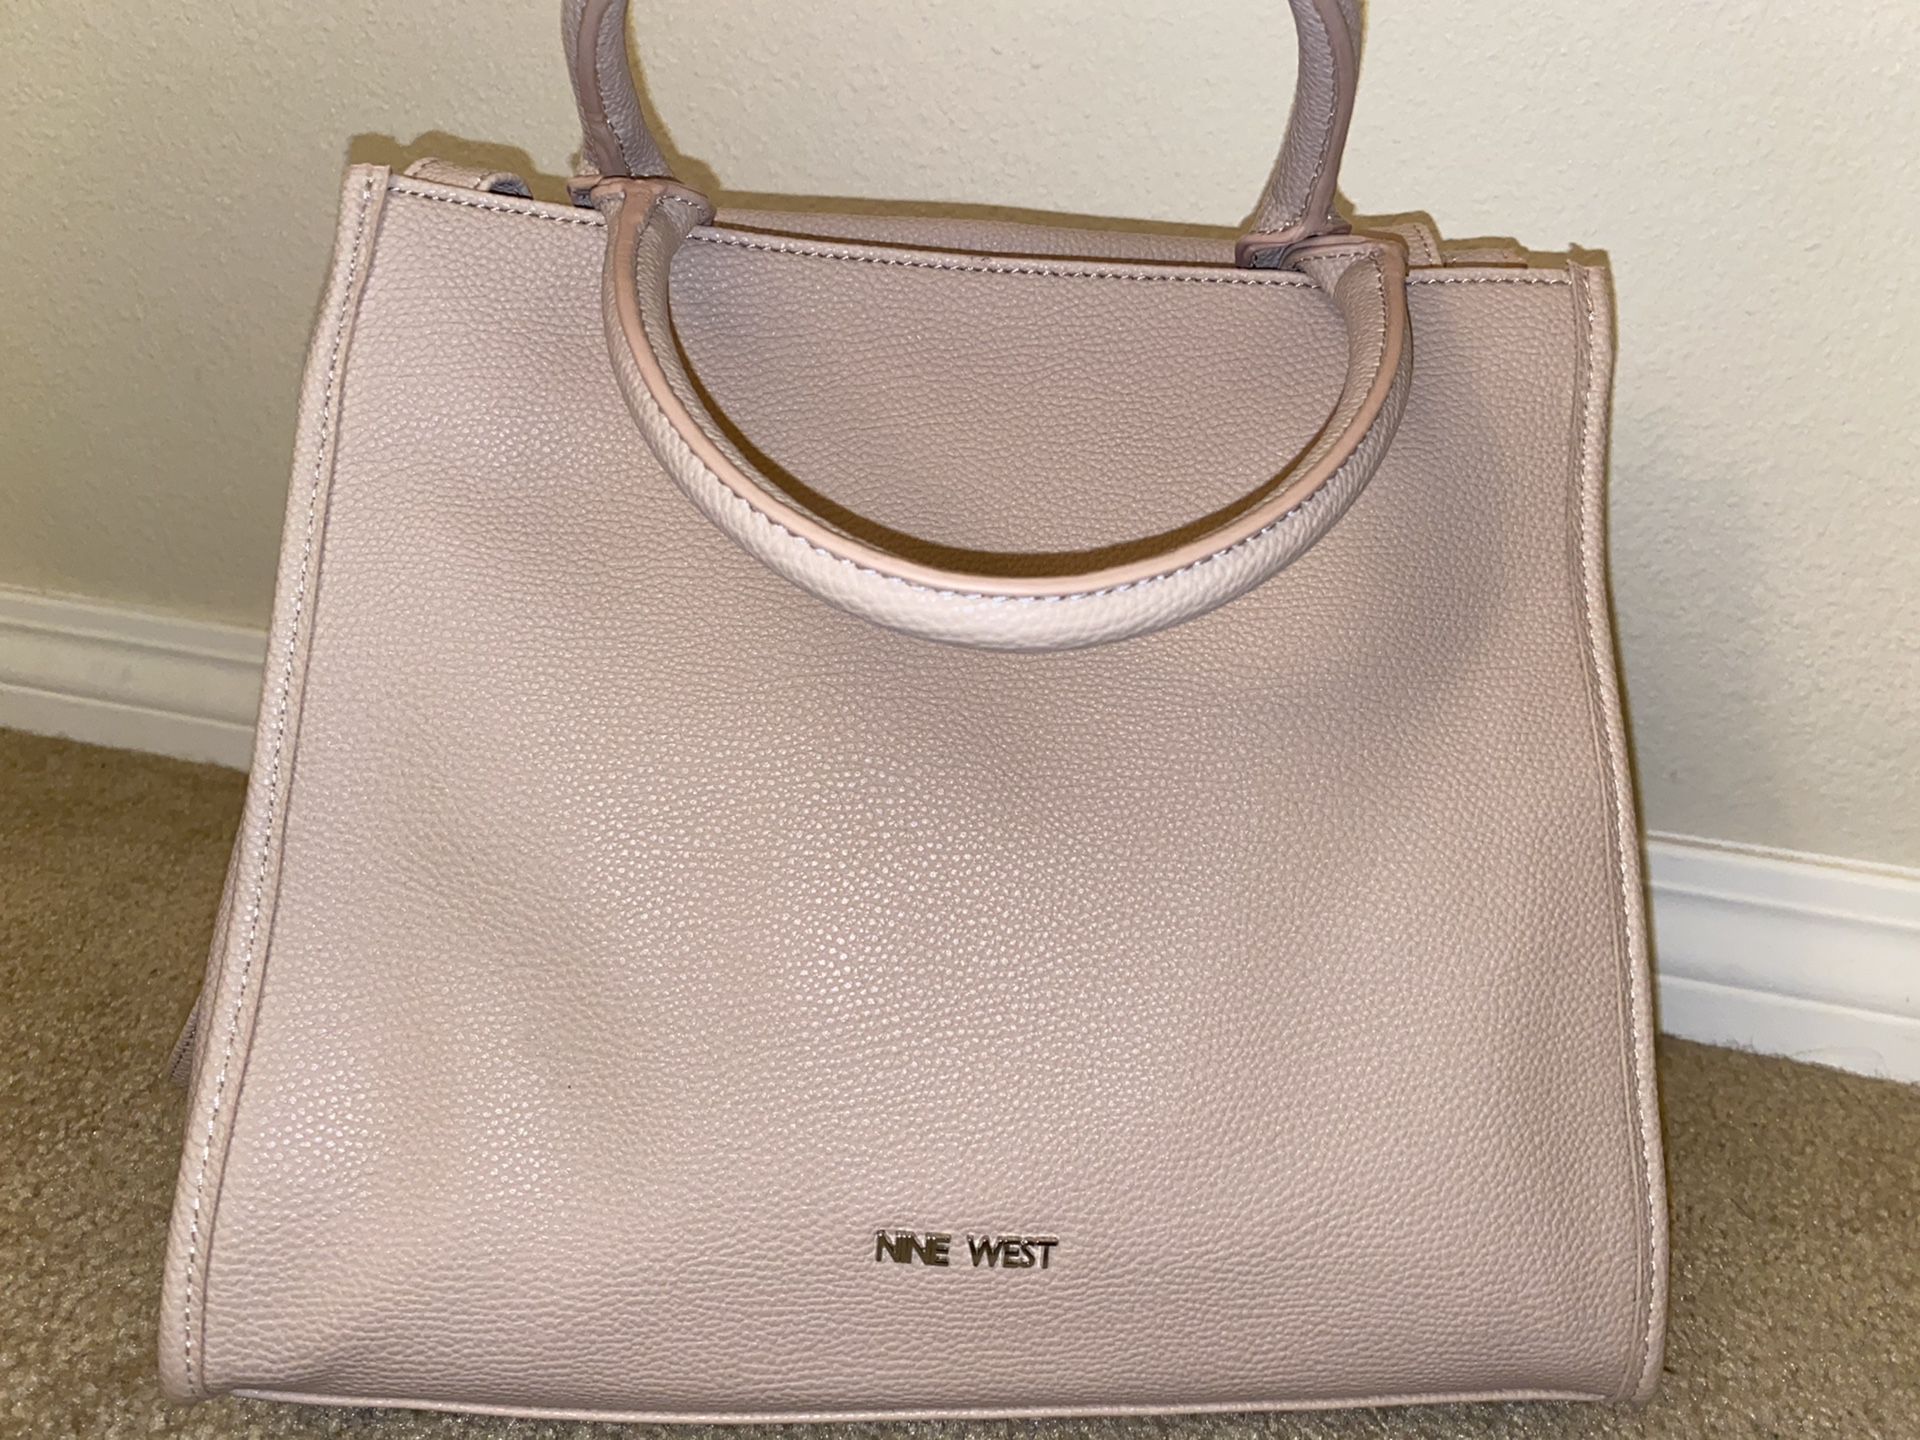 Brand new Nine West bag with tags